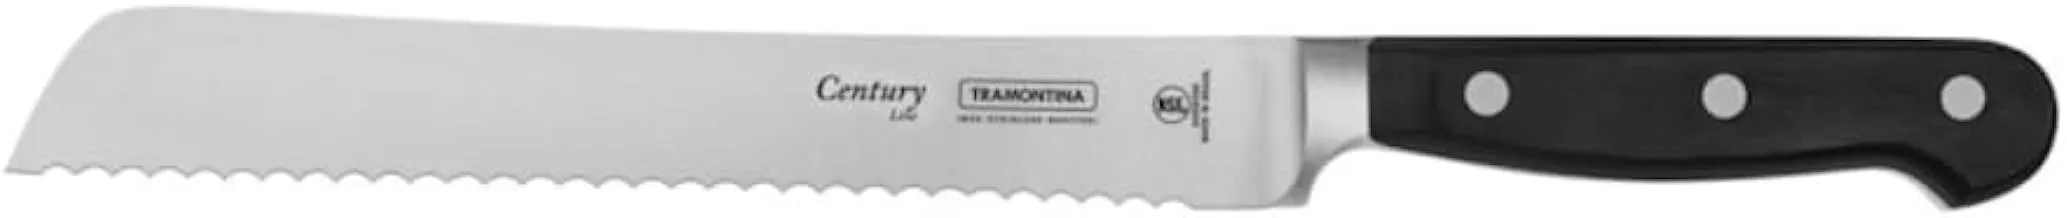 Tramontina Century 8 Inches Bread Knife with Stainless Steel Blade and Black Polycarbonate Handle